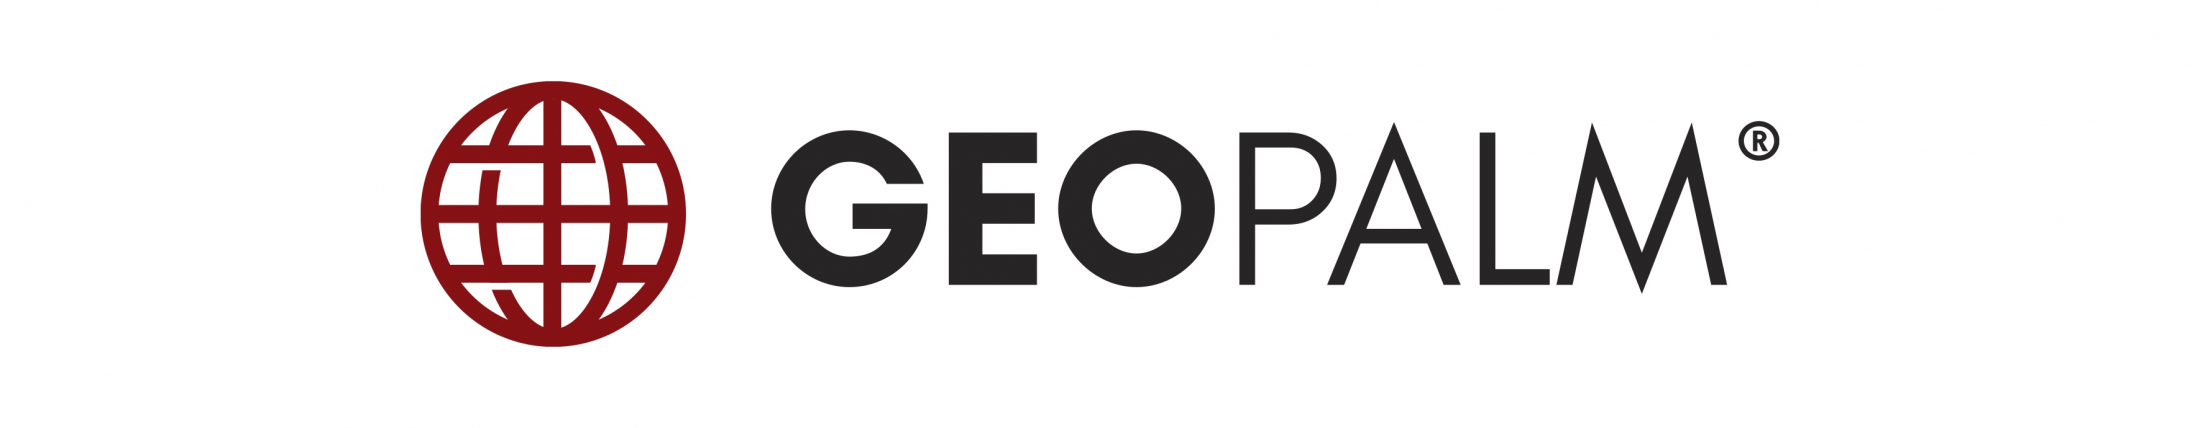 GEOPALM - Engineering Consulting